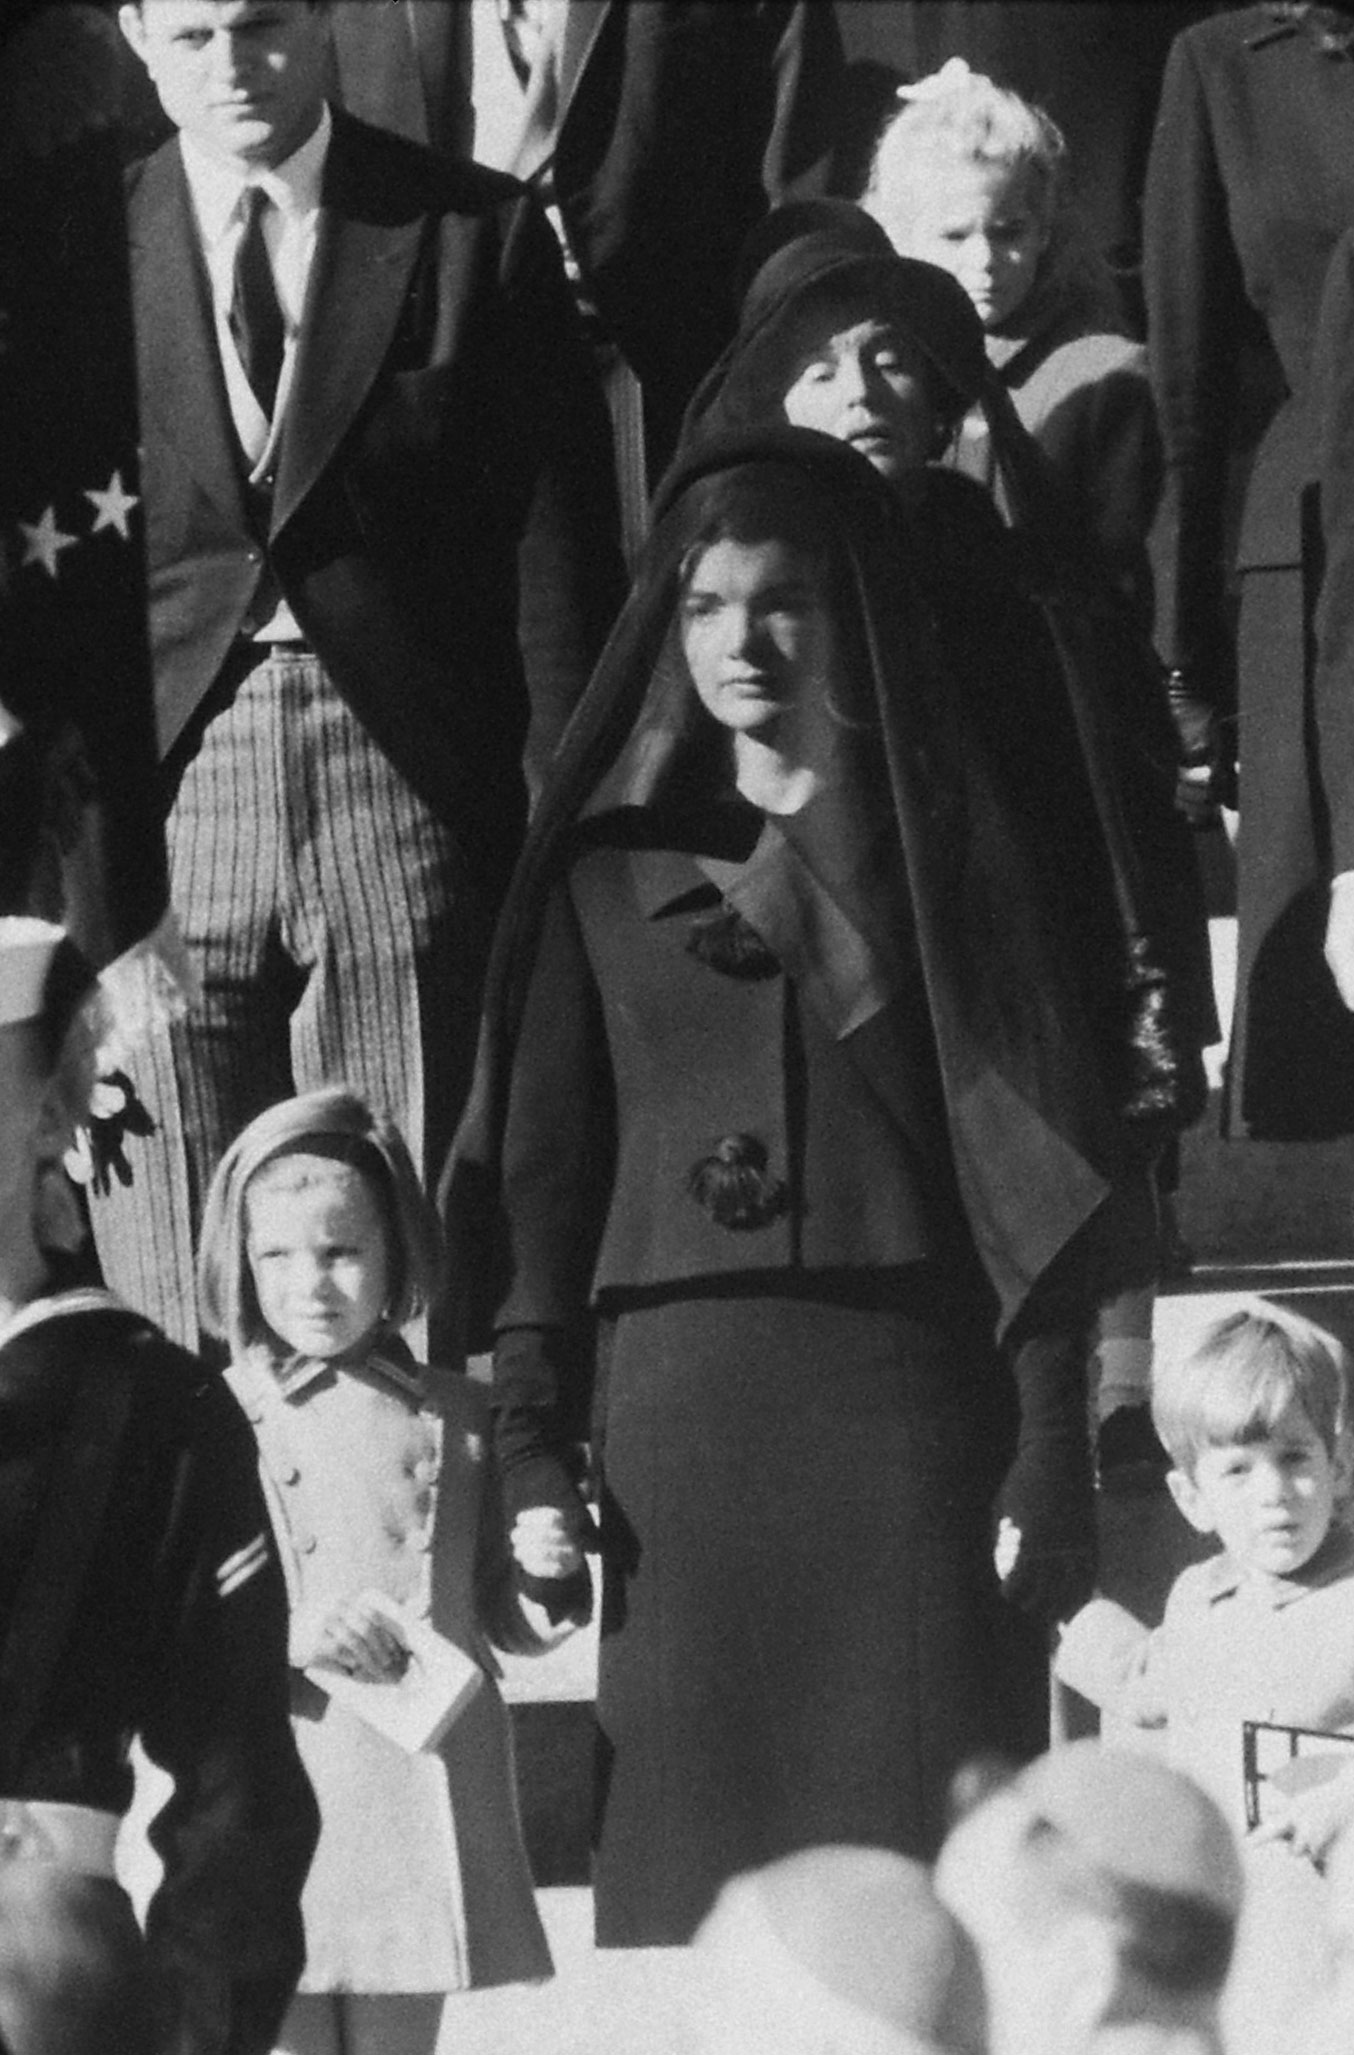 Wife. Mother. Niece. Three generations wait outside St. Matthew's for procession to cemetery. Behind Mrs. Kennedy stands the President's mother. Sydney Lawford, daughter of Kennedy's sister Pat, is at rear.